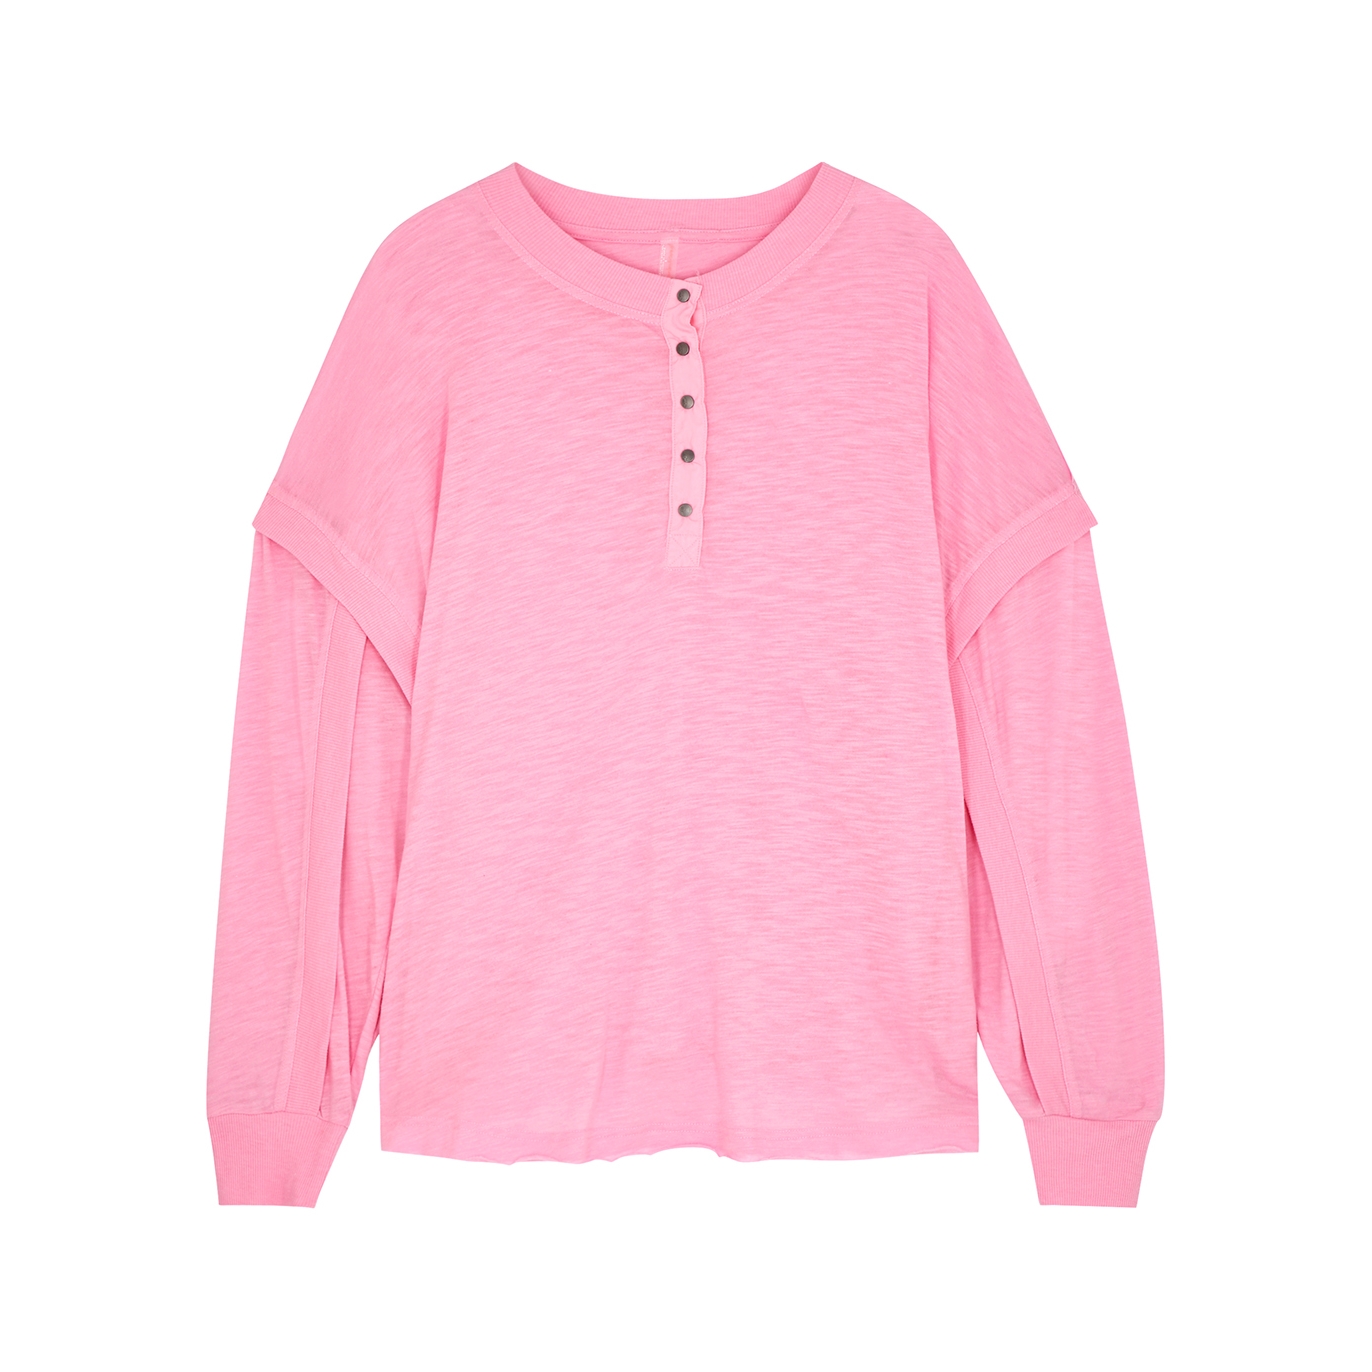 Free People Movement One Up Pink Slubbed Cotton-blend Top